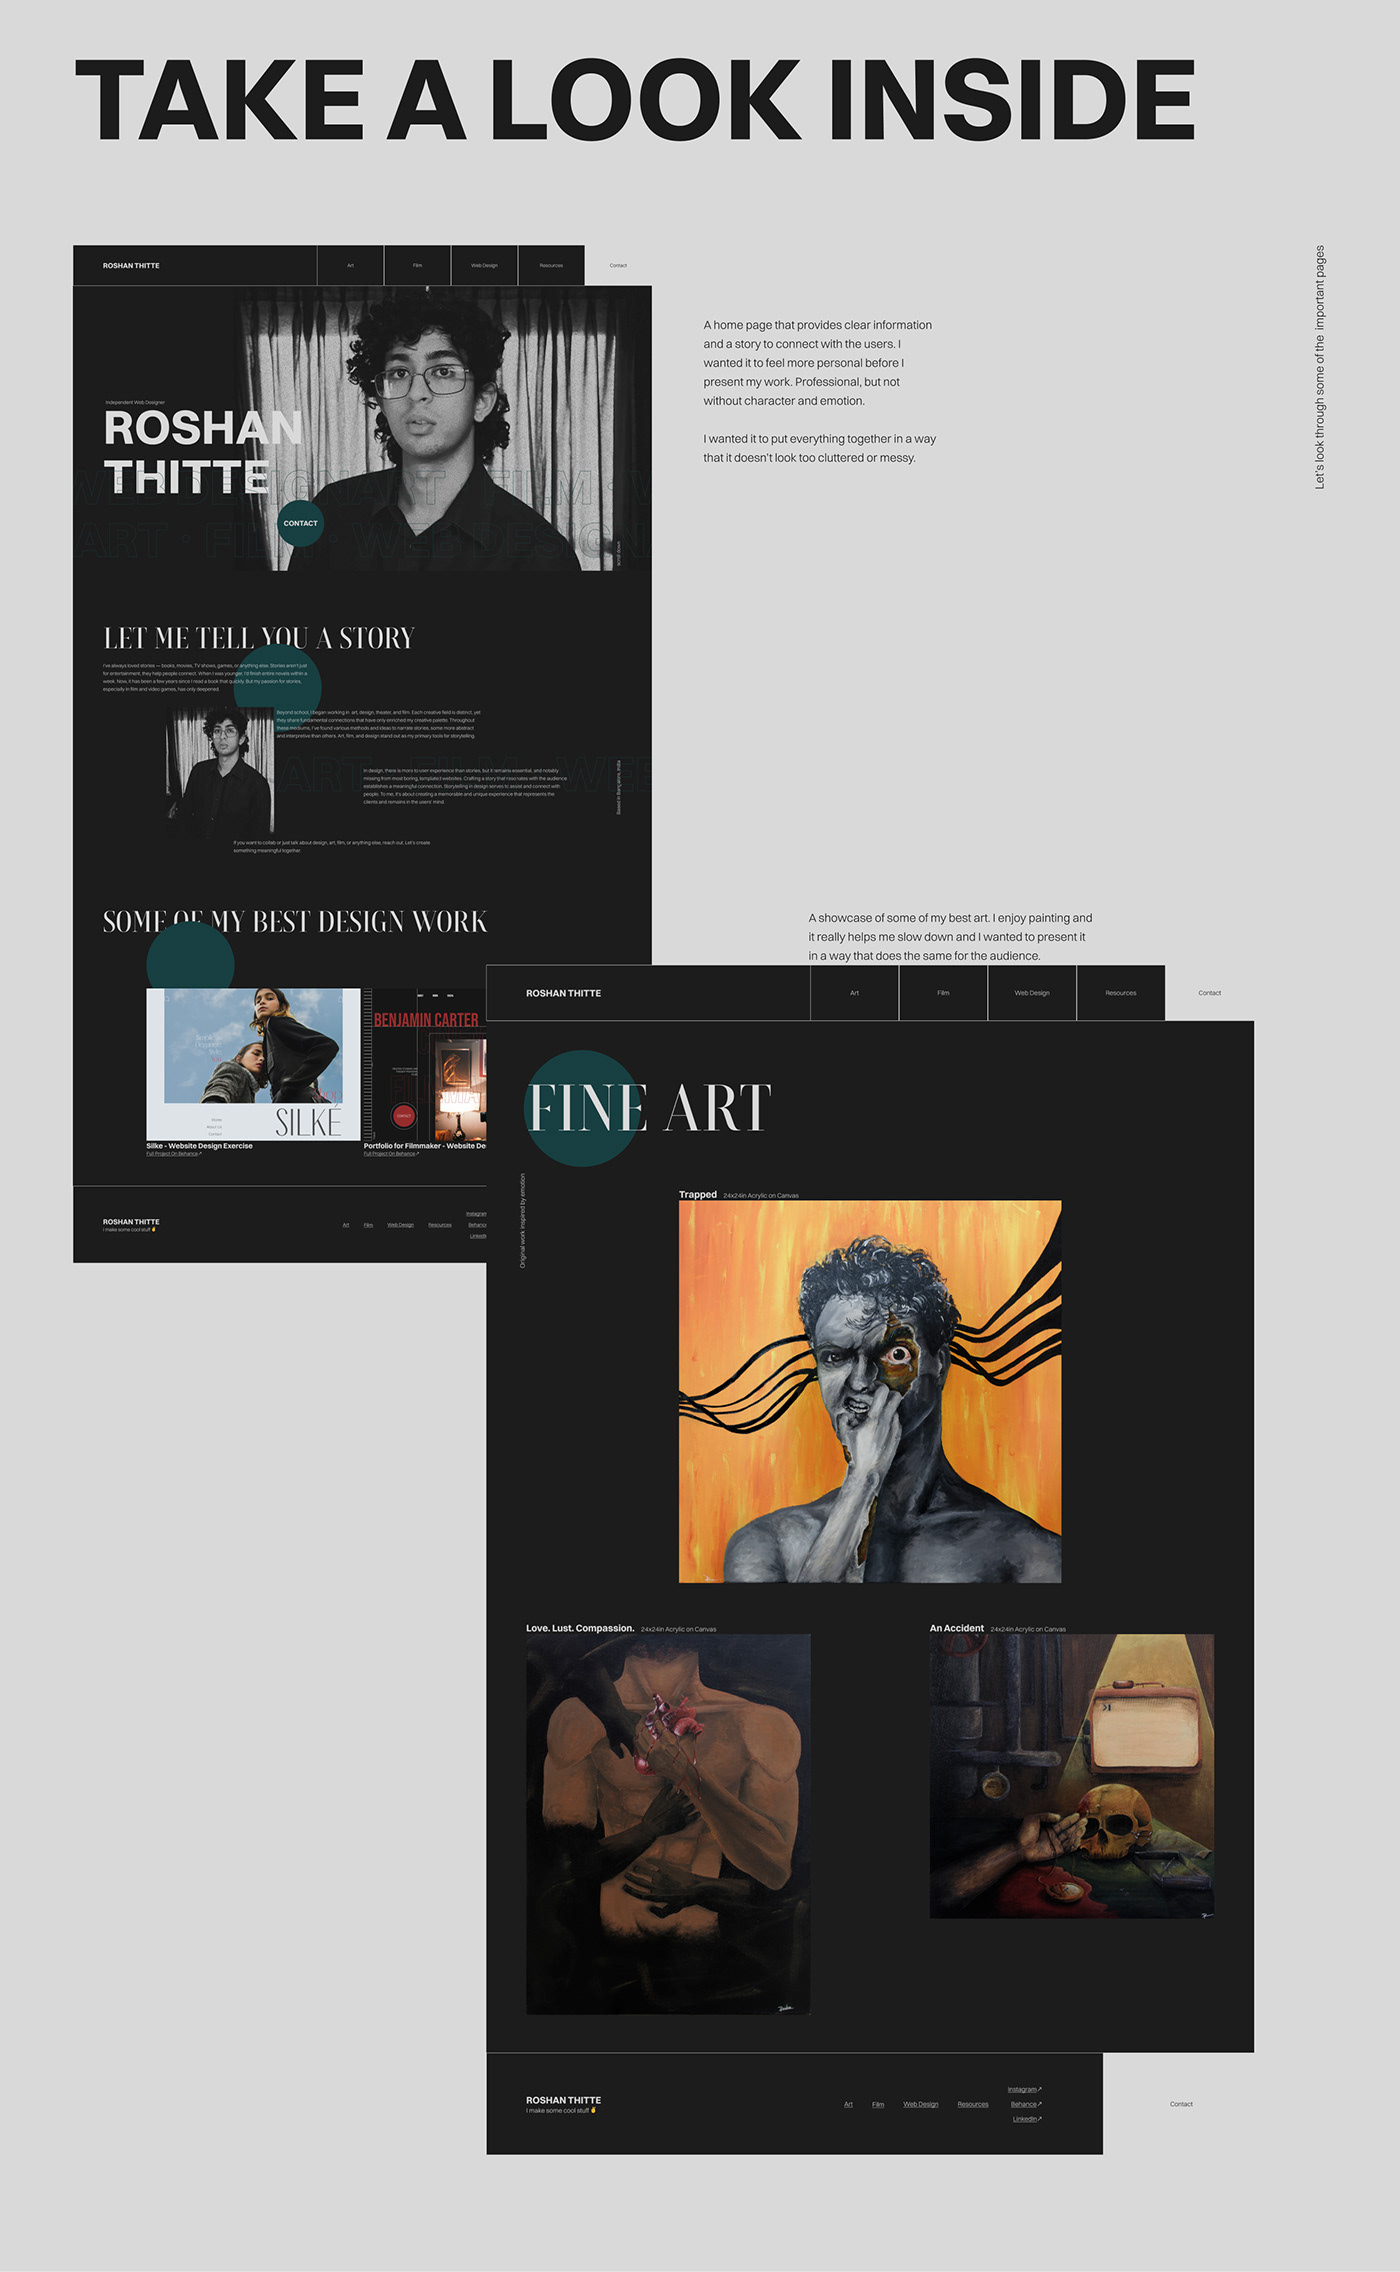 A breakdown of the Home and Fine Art pages.